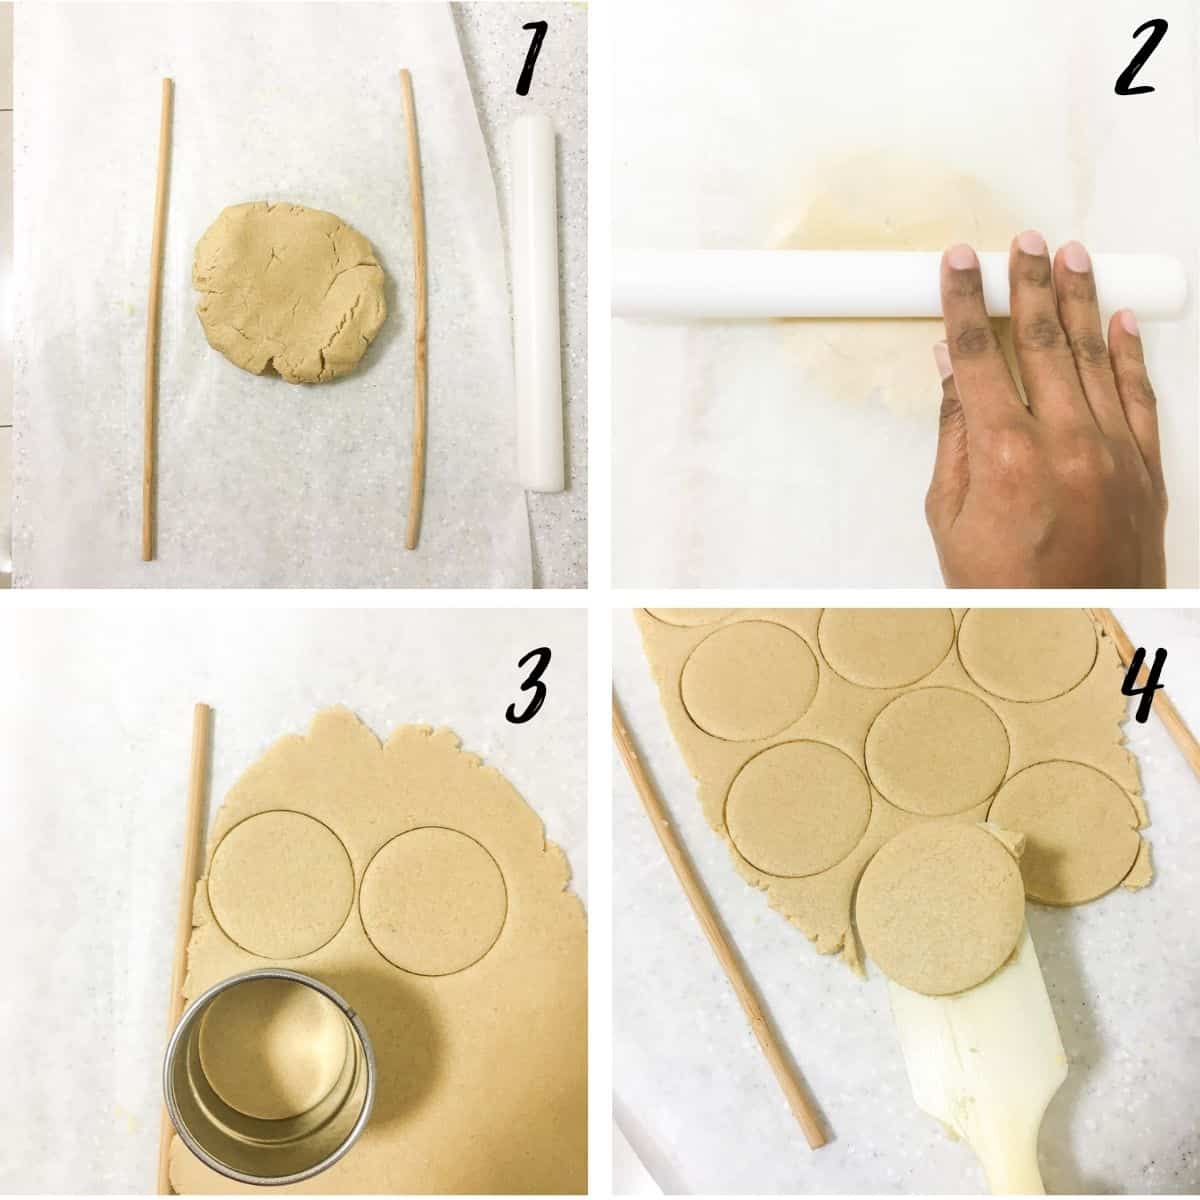 A poster of 4 images showing how to roll and cut a cookie dough into round cookies